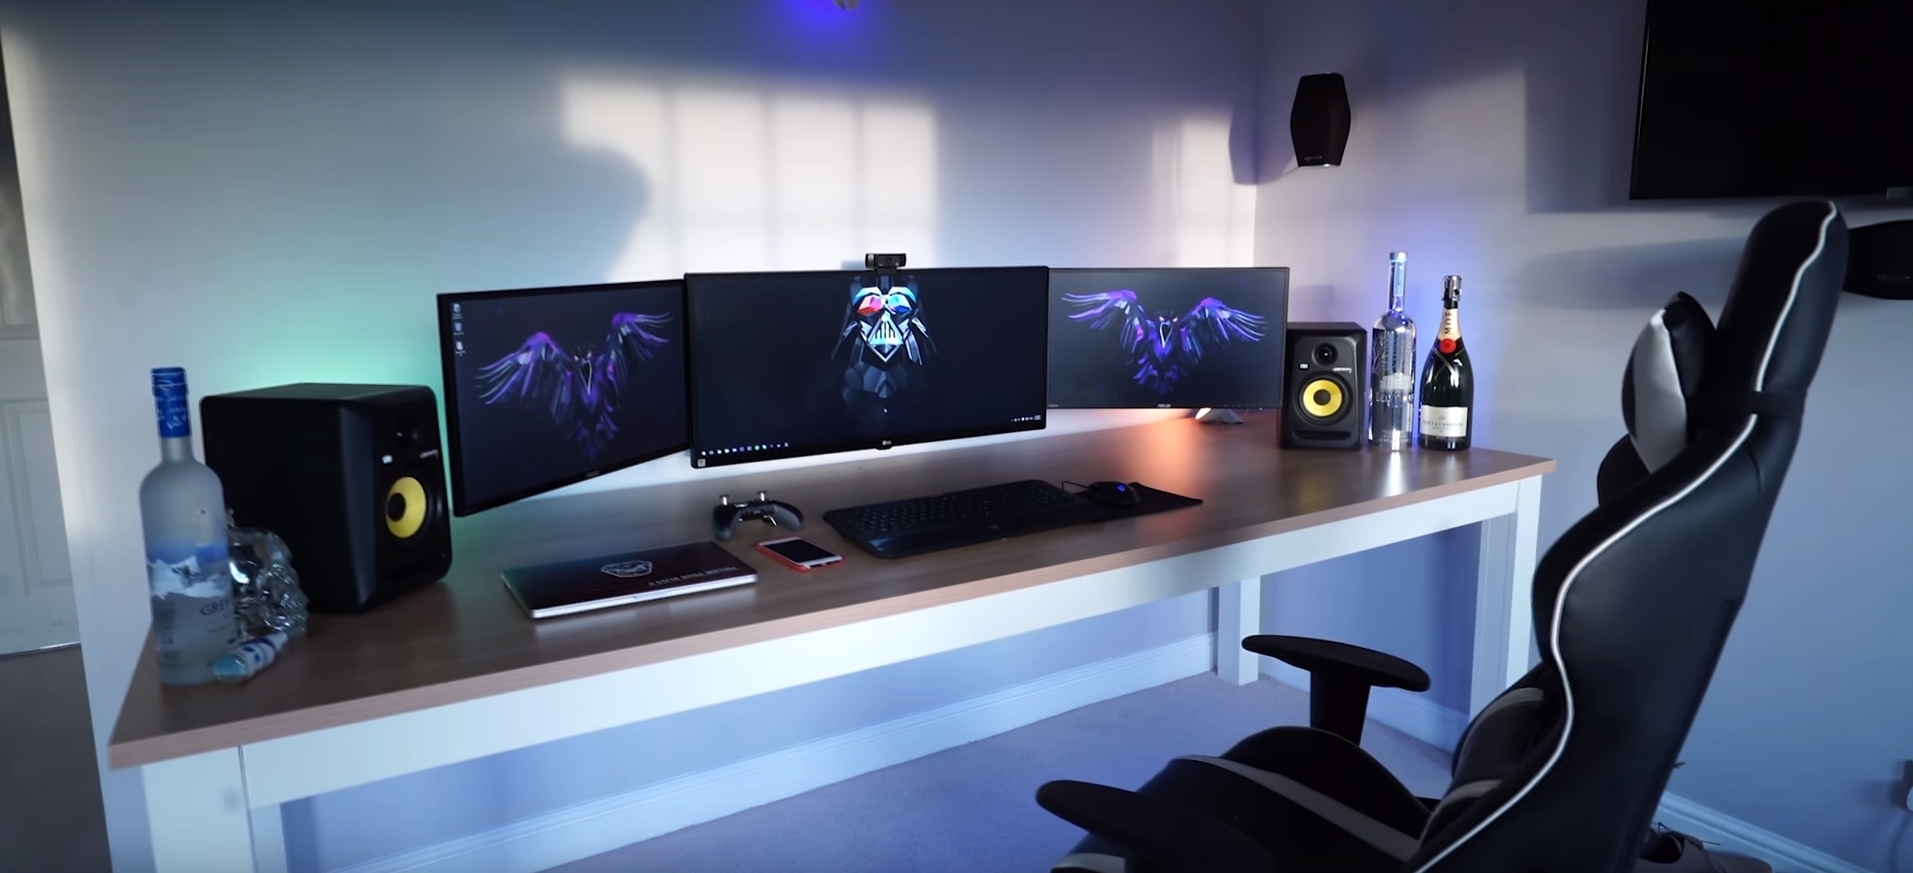 Best desk placement in my own new small flat? | Tom's Hardware Forum